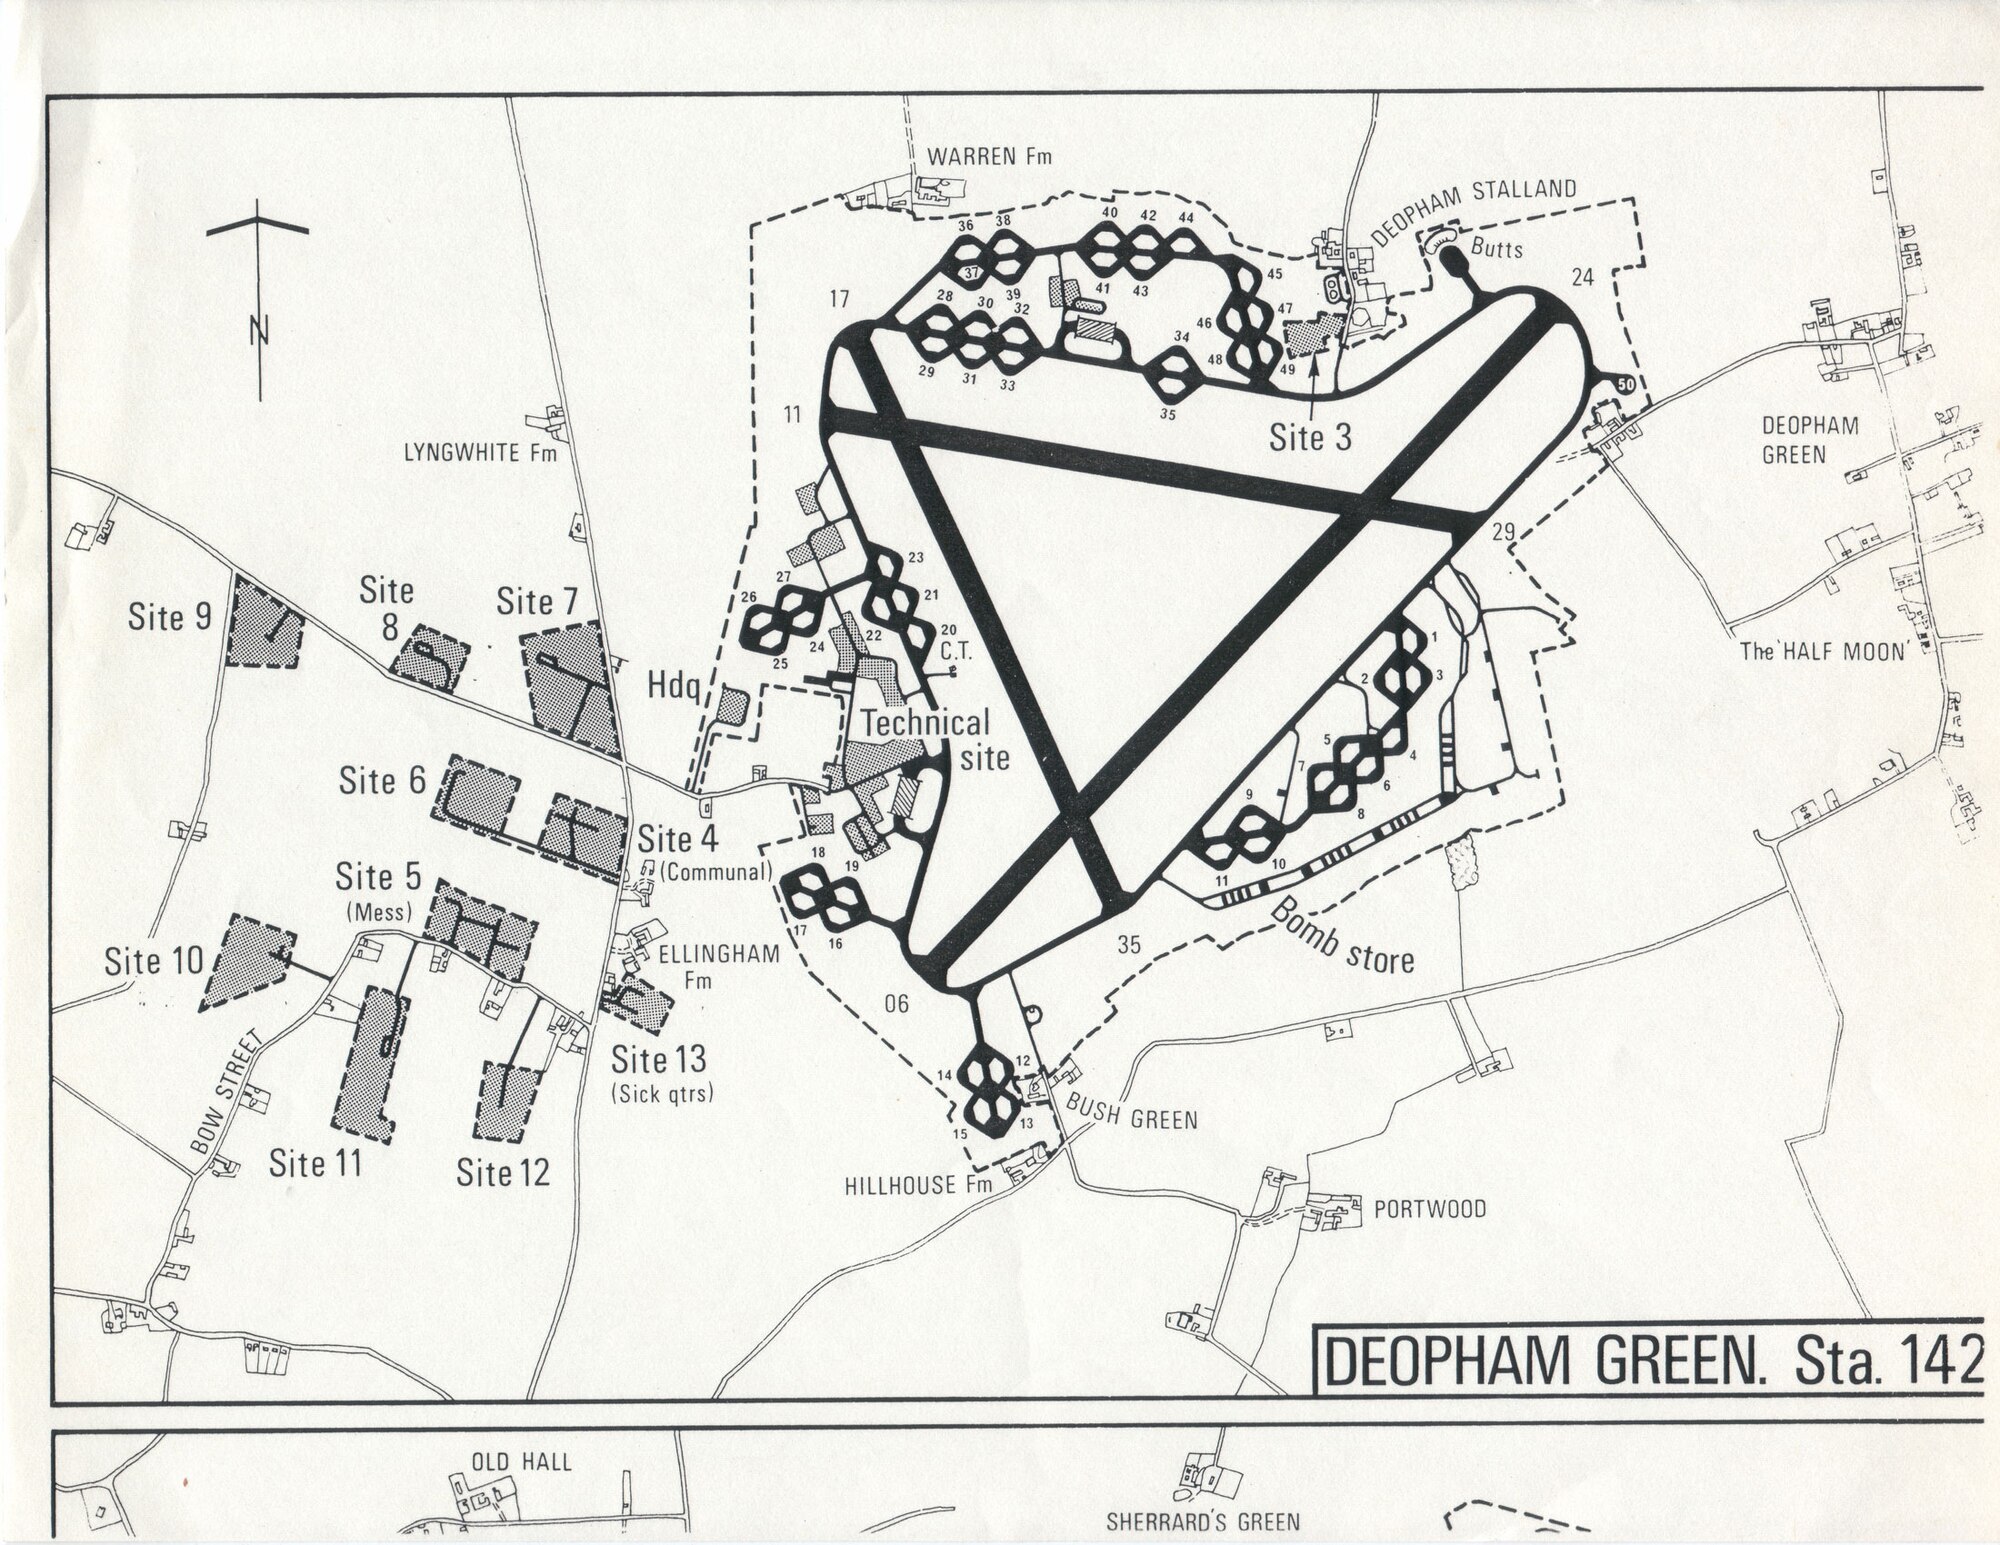 Chart shows layout of the airfield and structures at Deopham Green. (Courtesy photo)